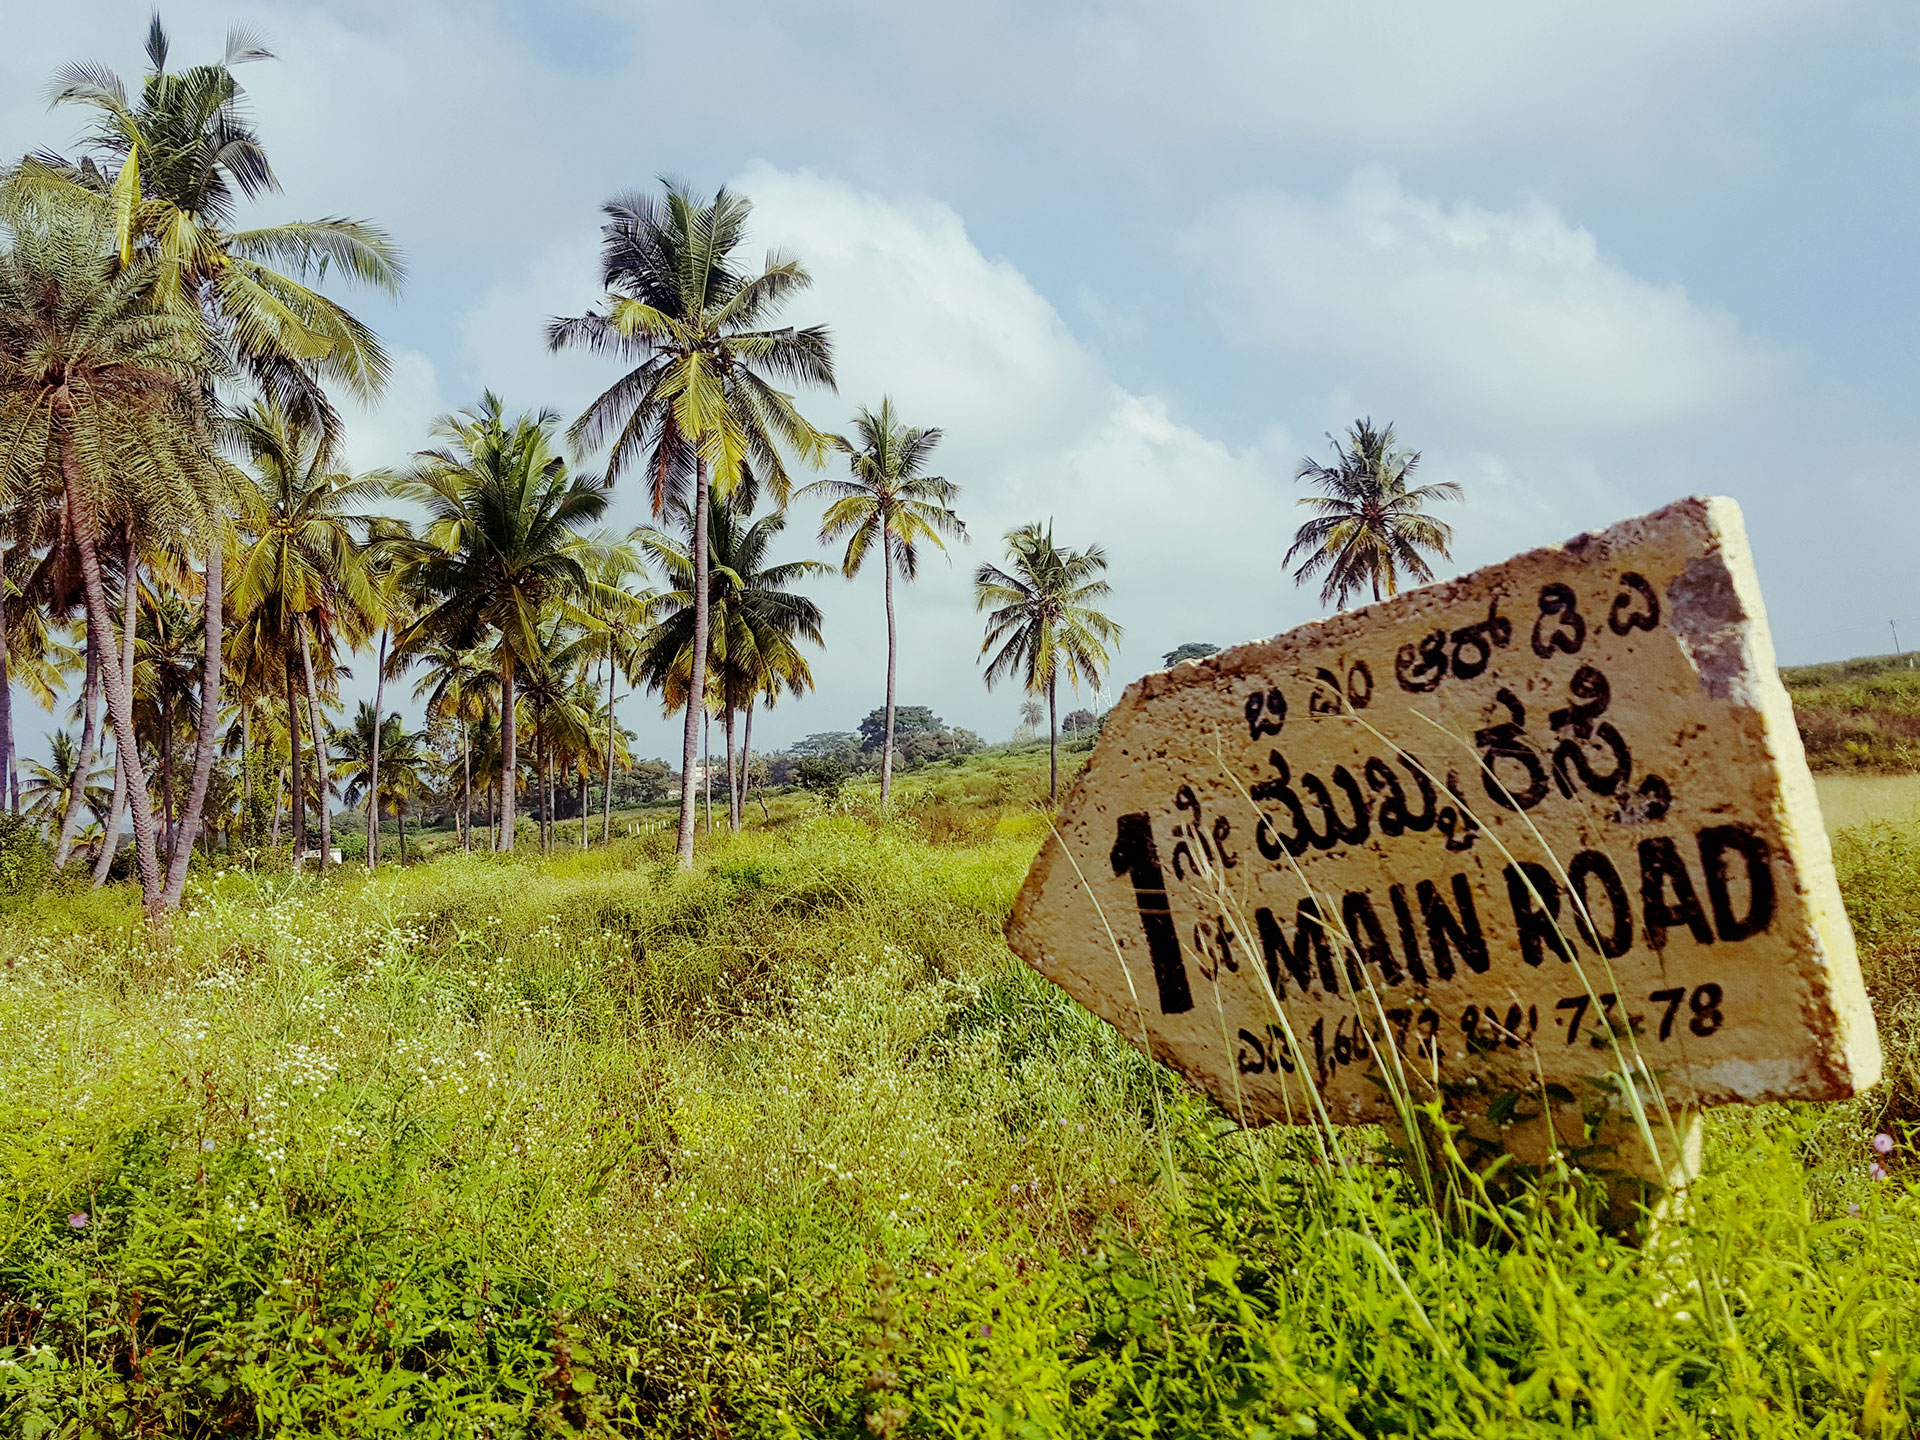 Road sign and palm trees in India